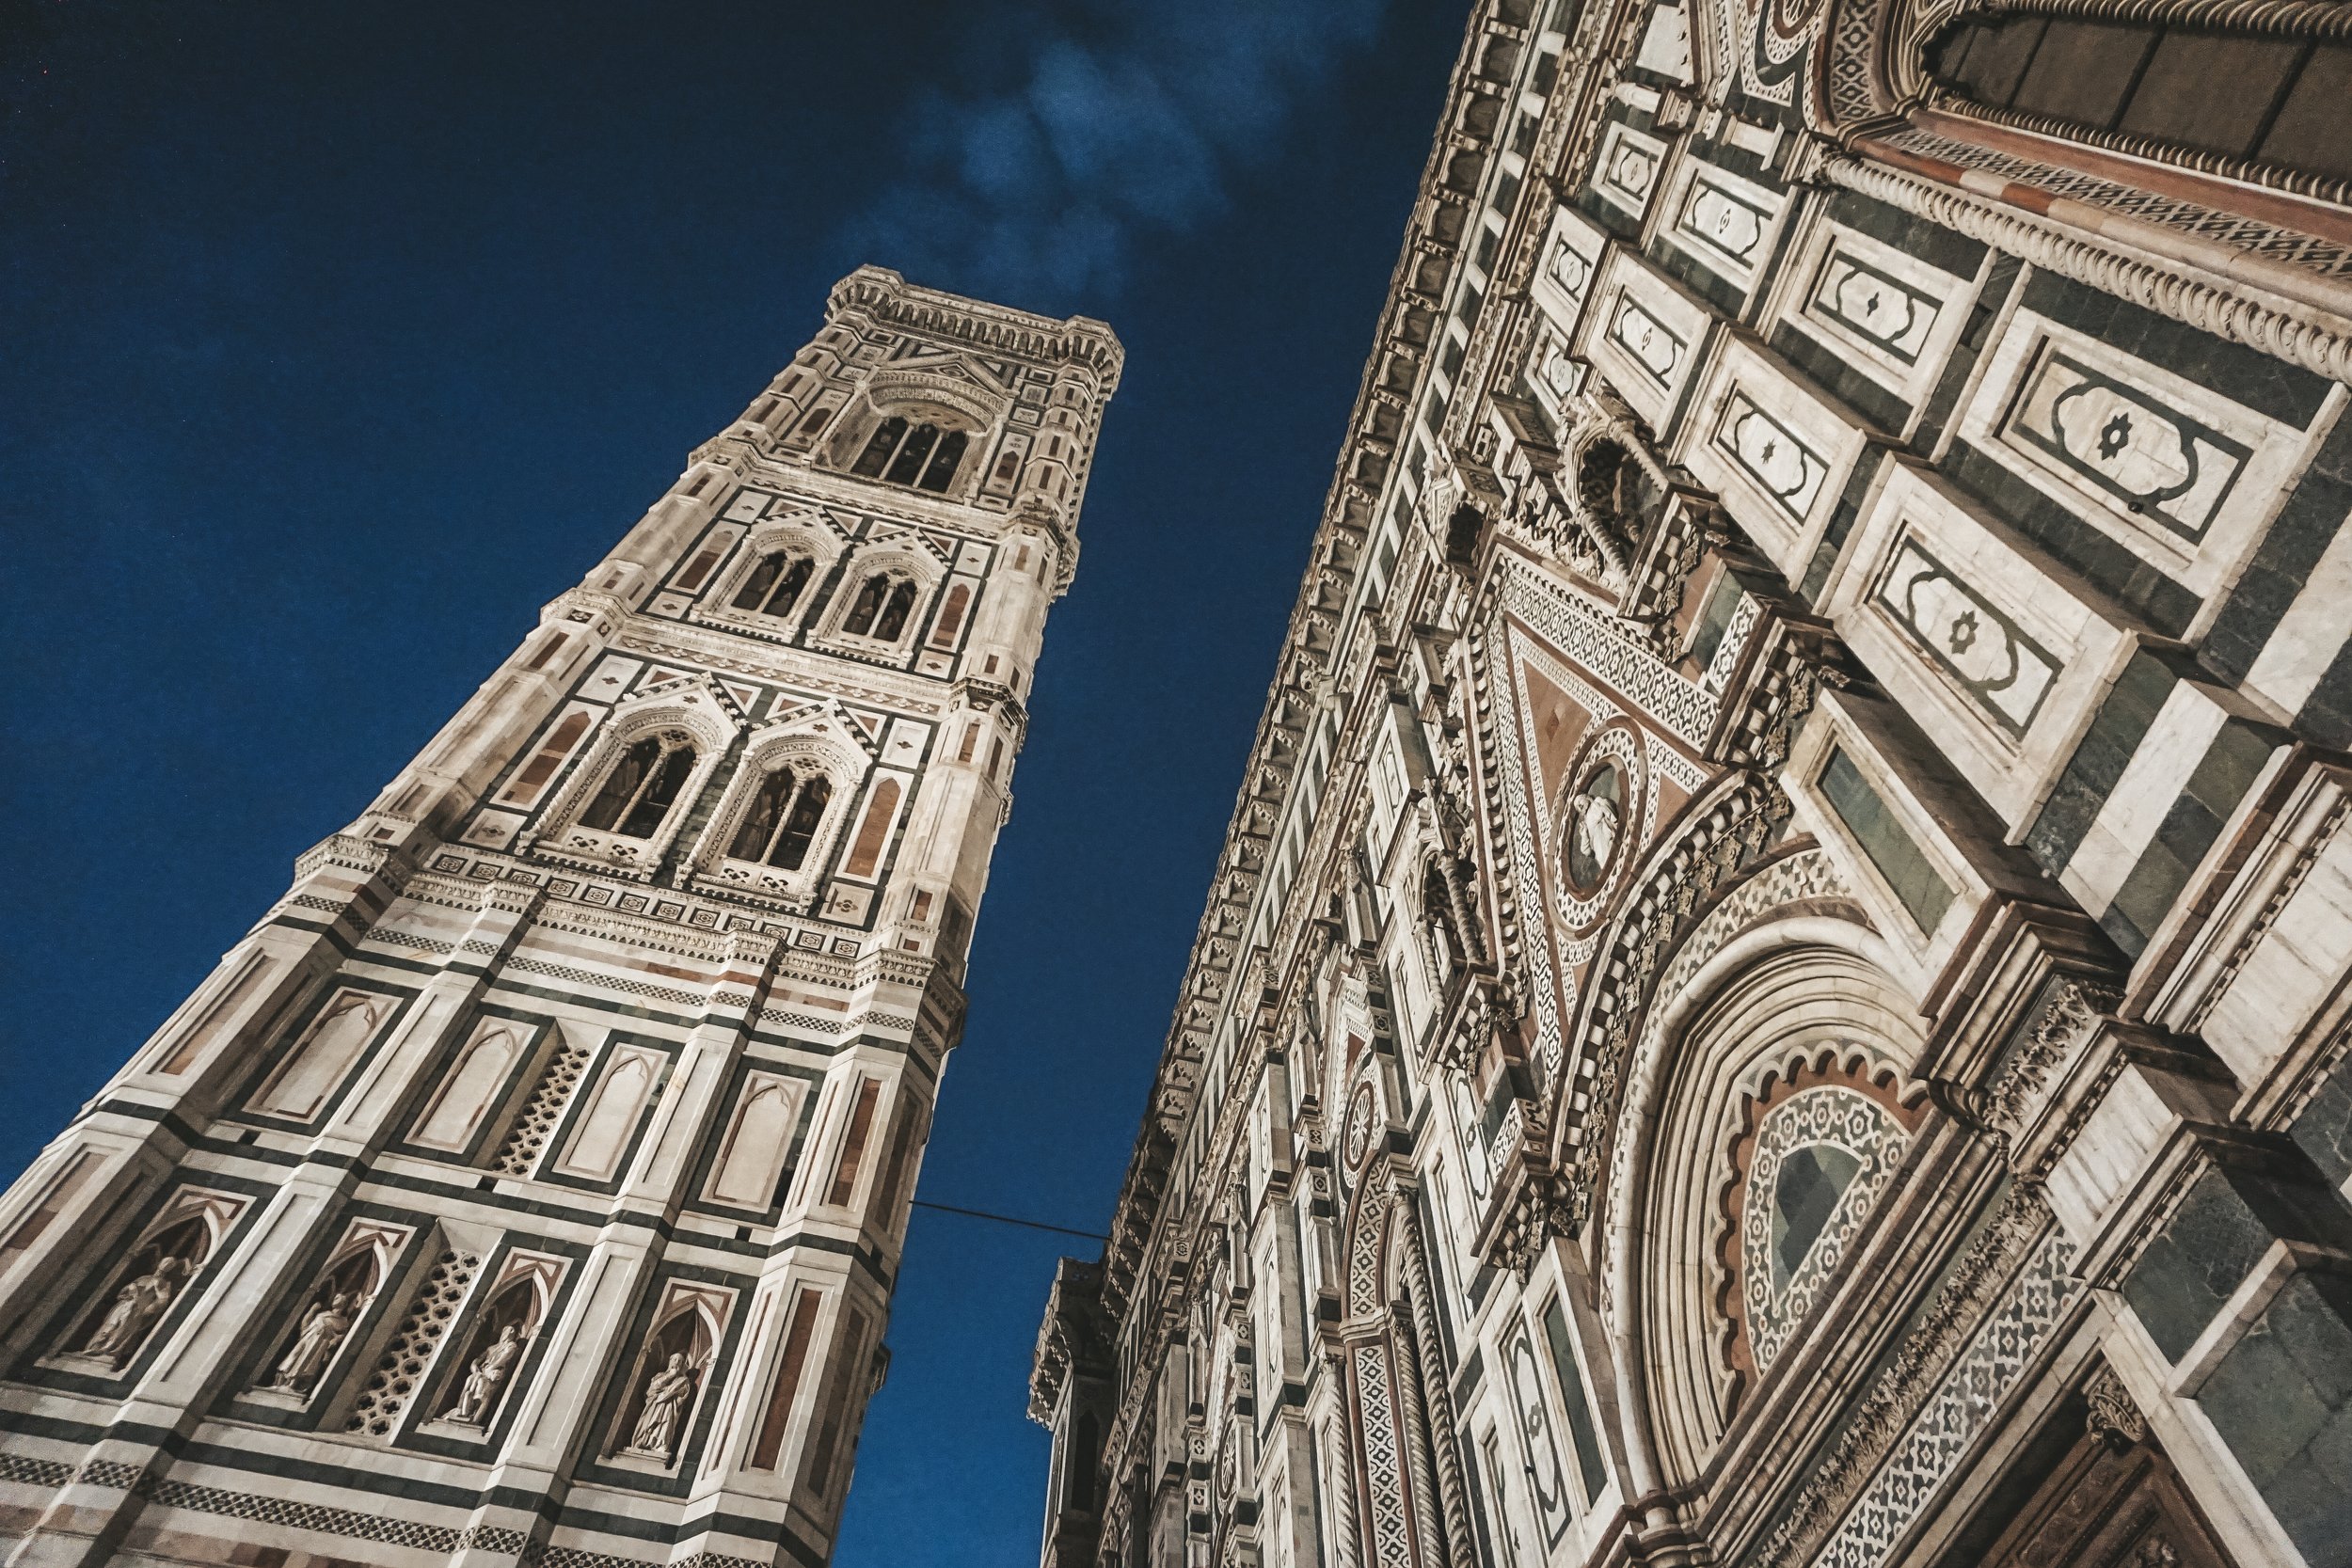 The Duomo is the pinnacle of Gothic style Magnificence 